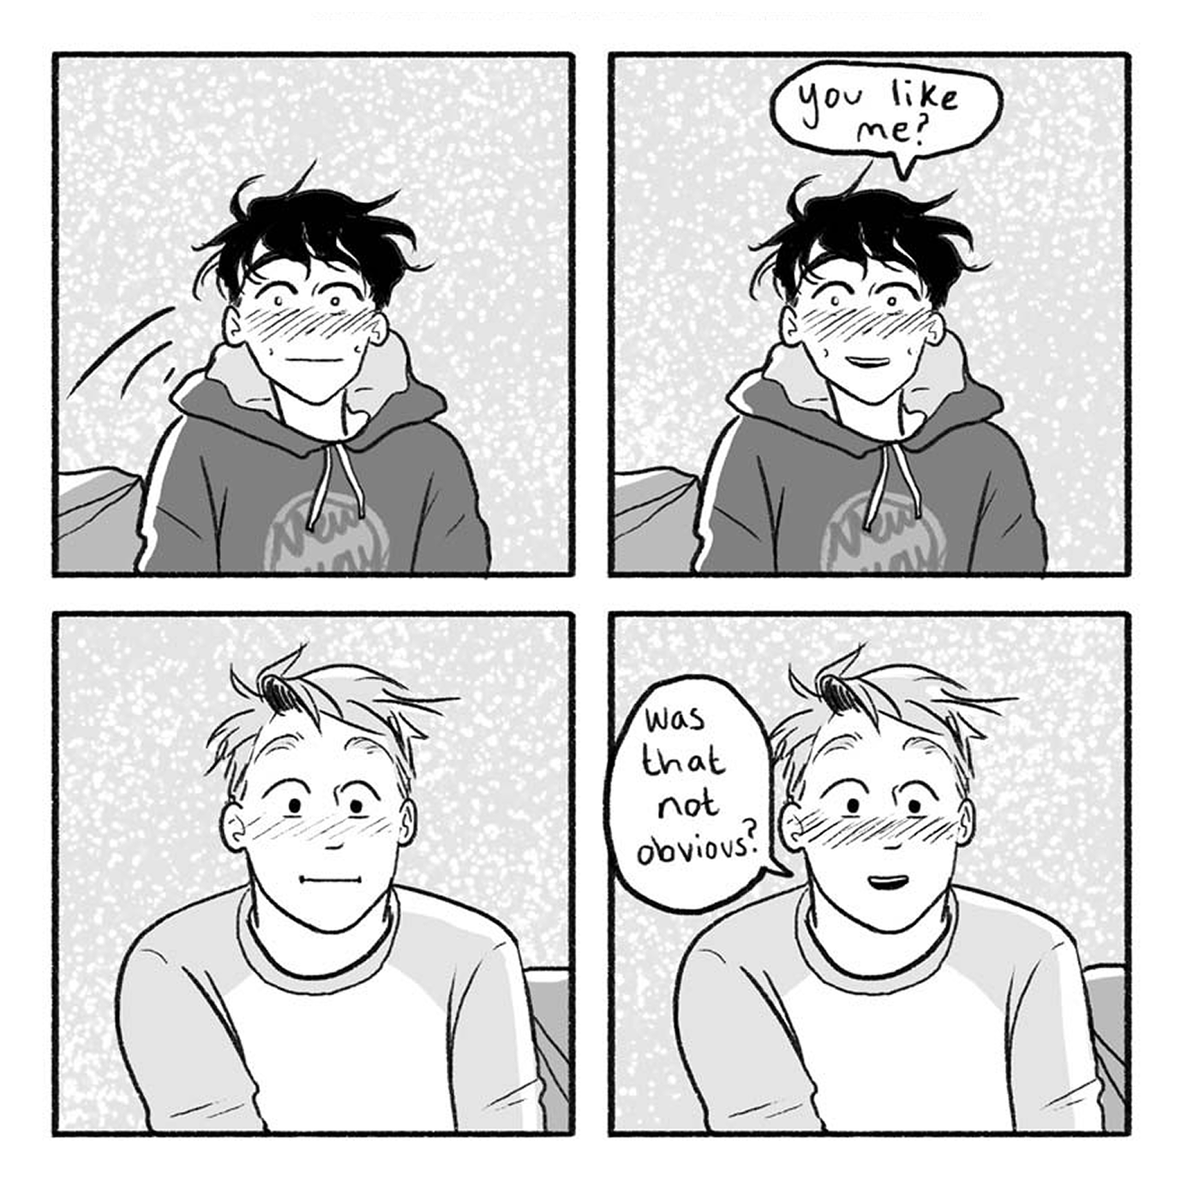 Fell in love with #Heartstopper. Wanted to celebrate with redraws of some my favorite panels ✨ [1/?] 